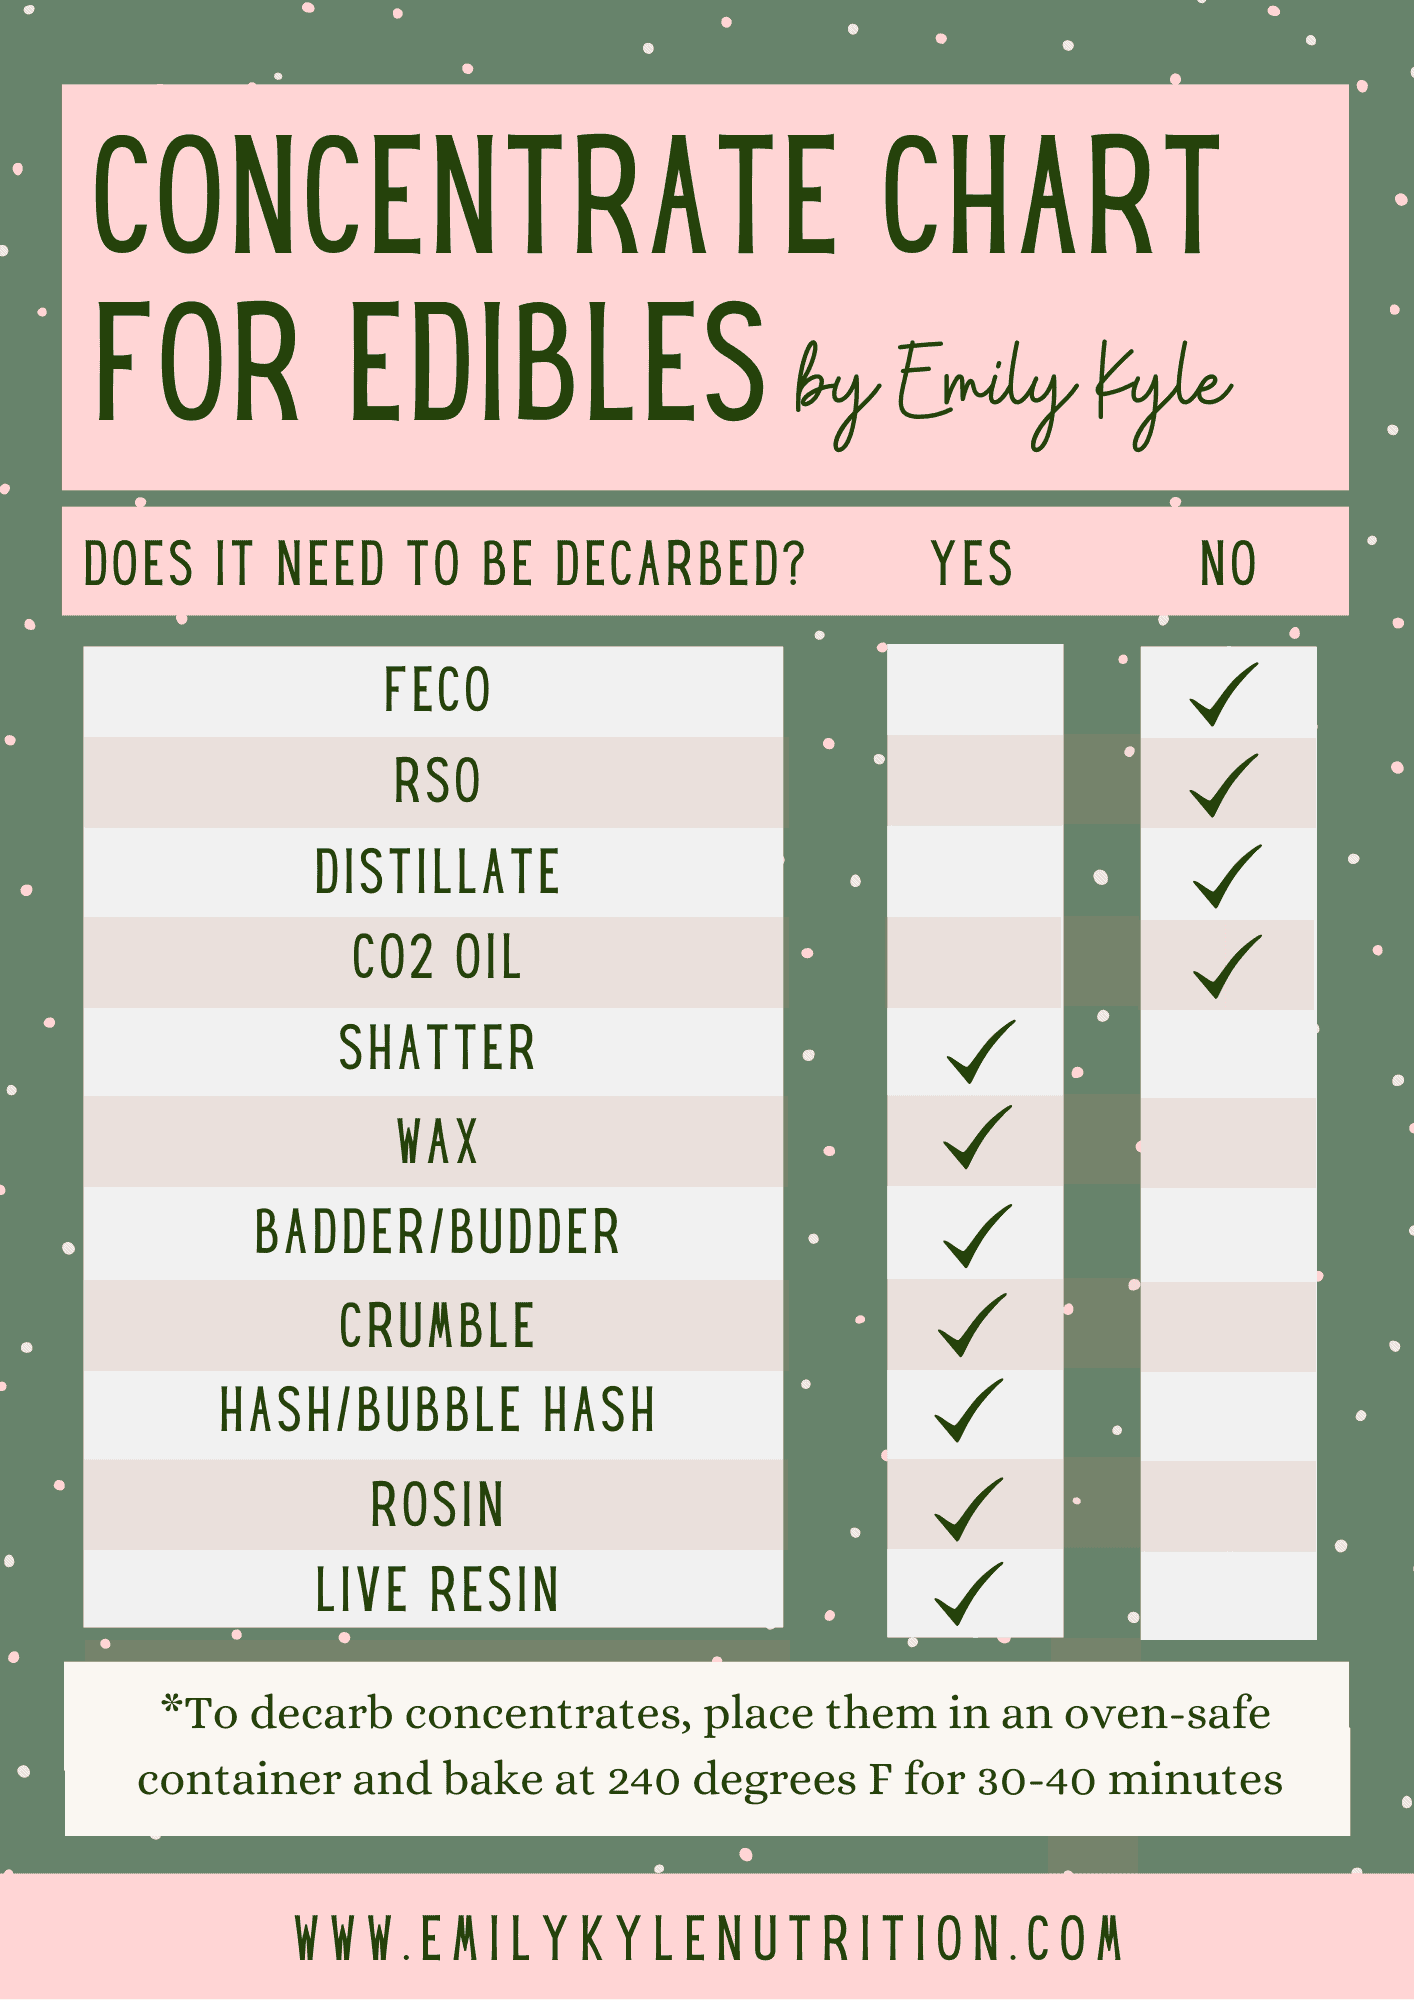 Concentrate Chart for Edibles